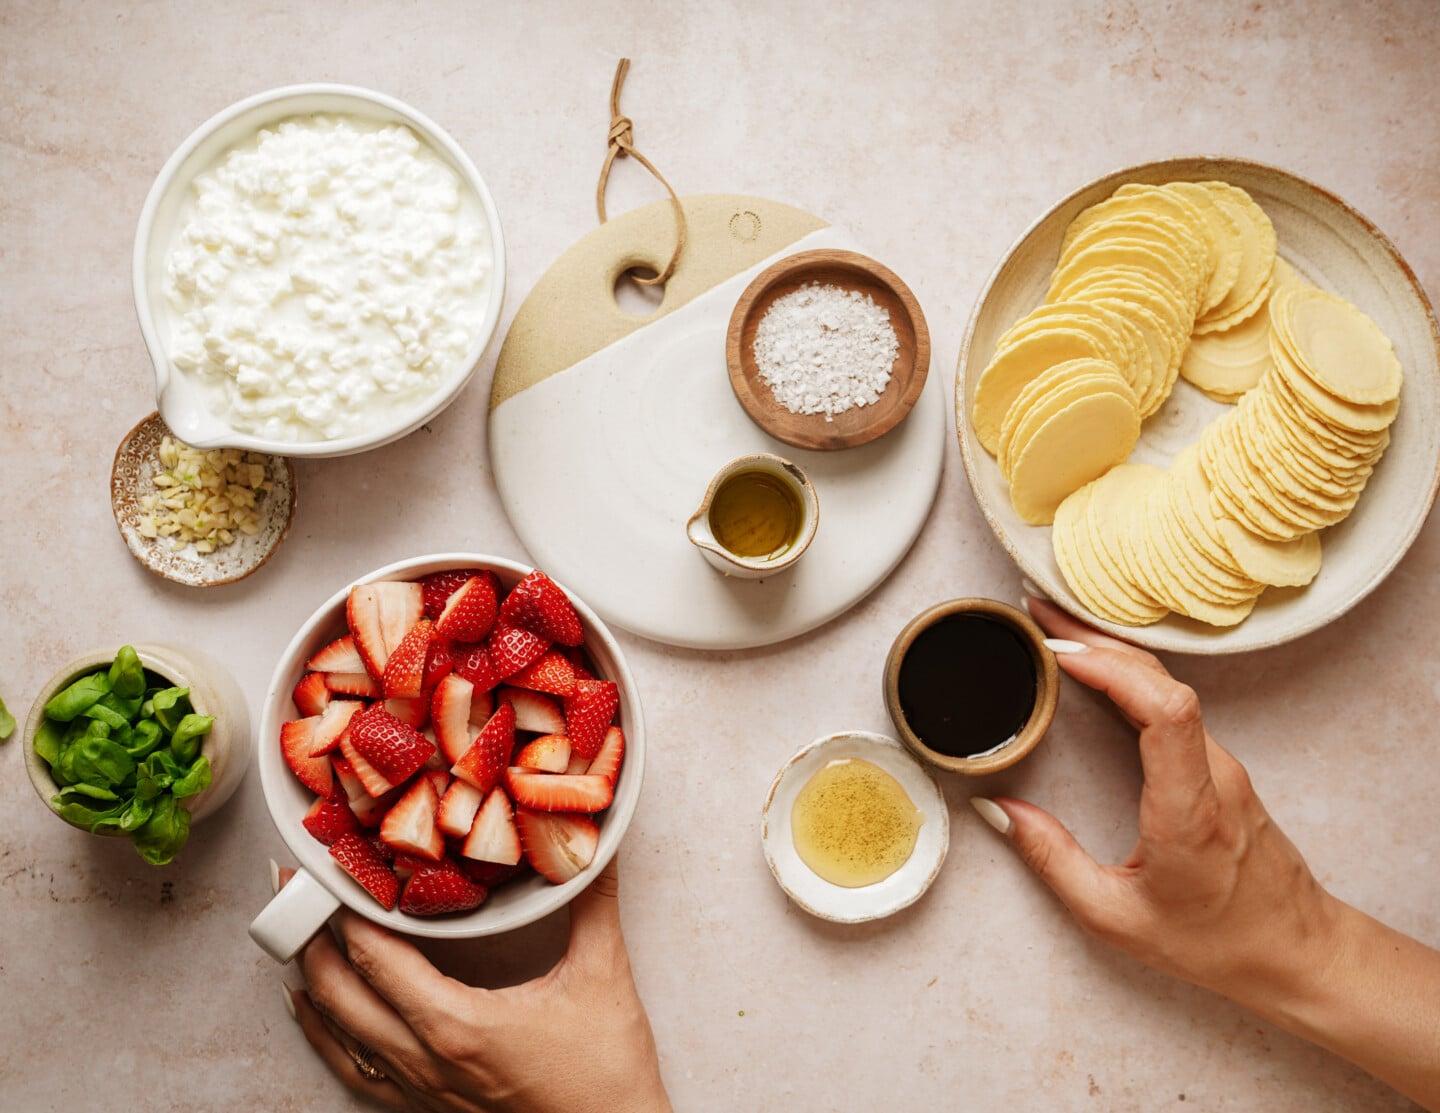 Ingredients for whipped cottage cheese